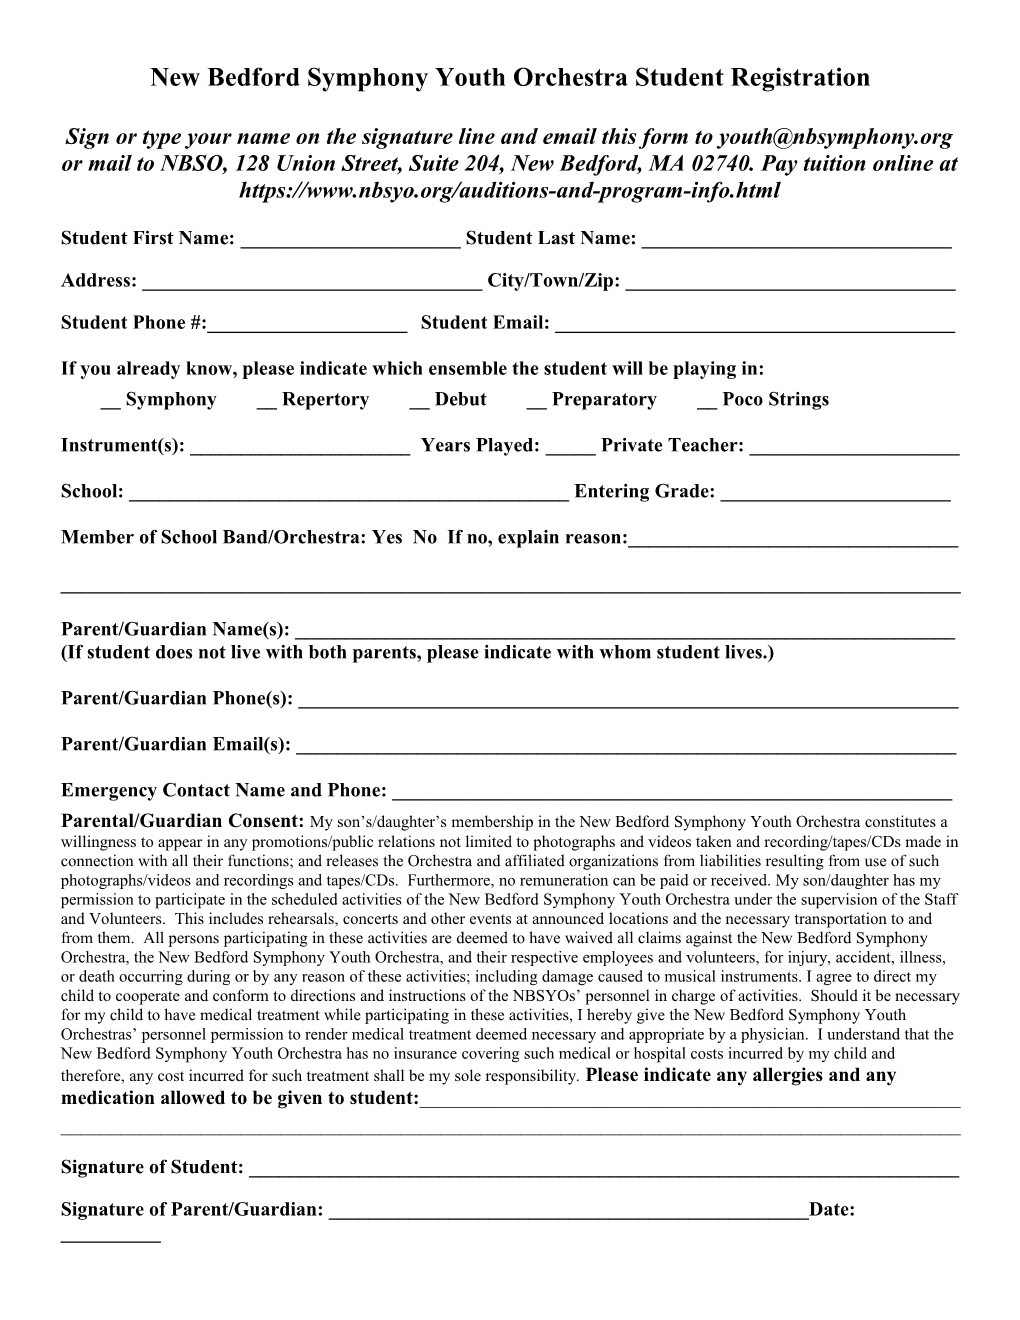 New Bedford Symphony Youth Orchestra Student Registration